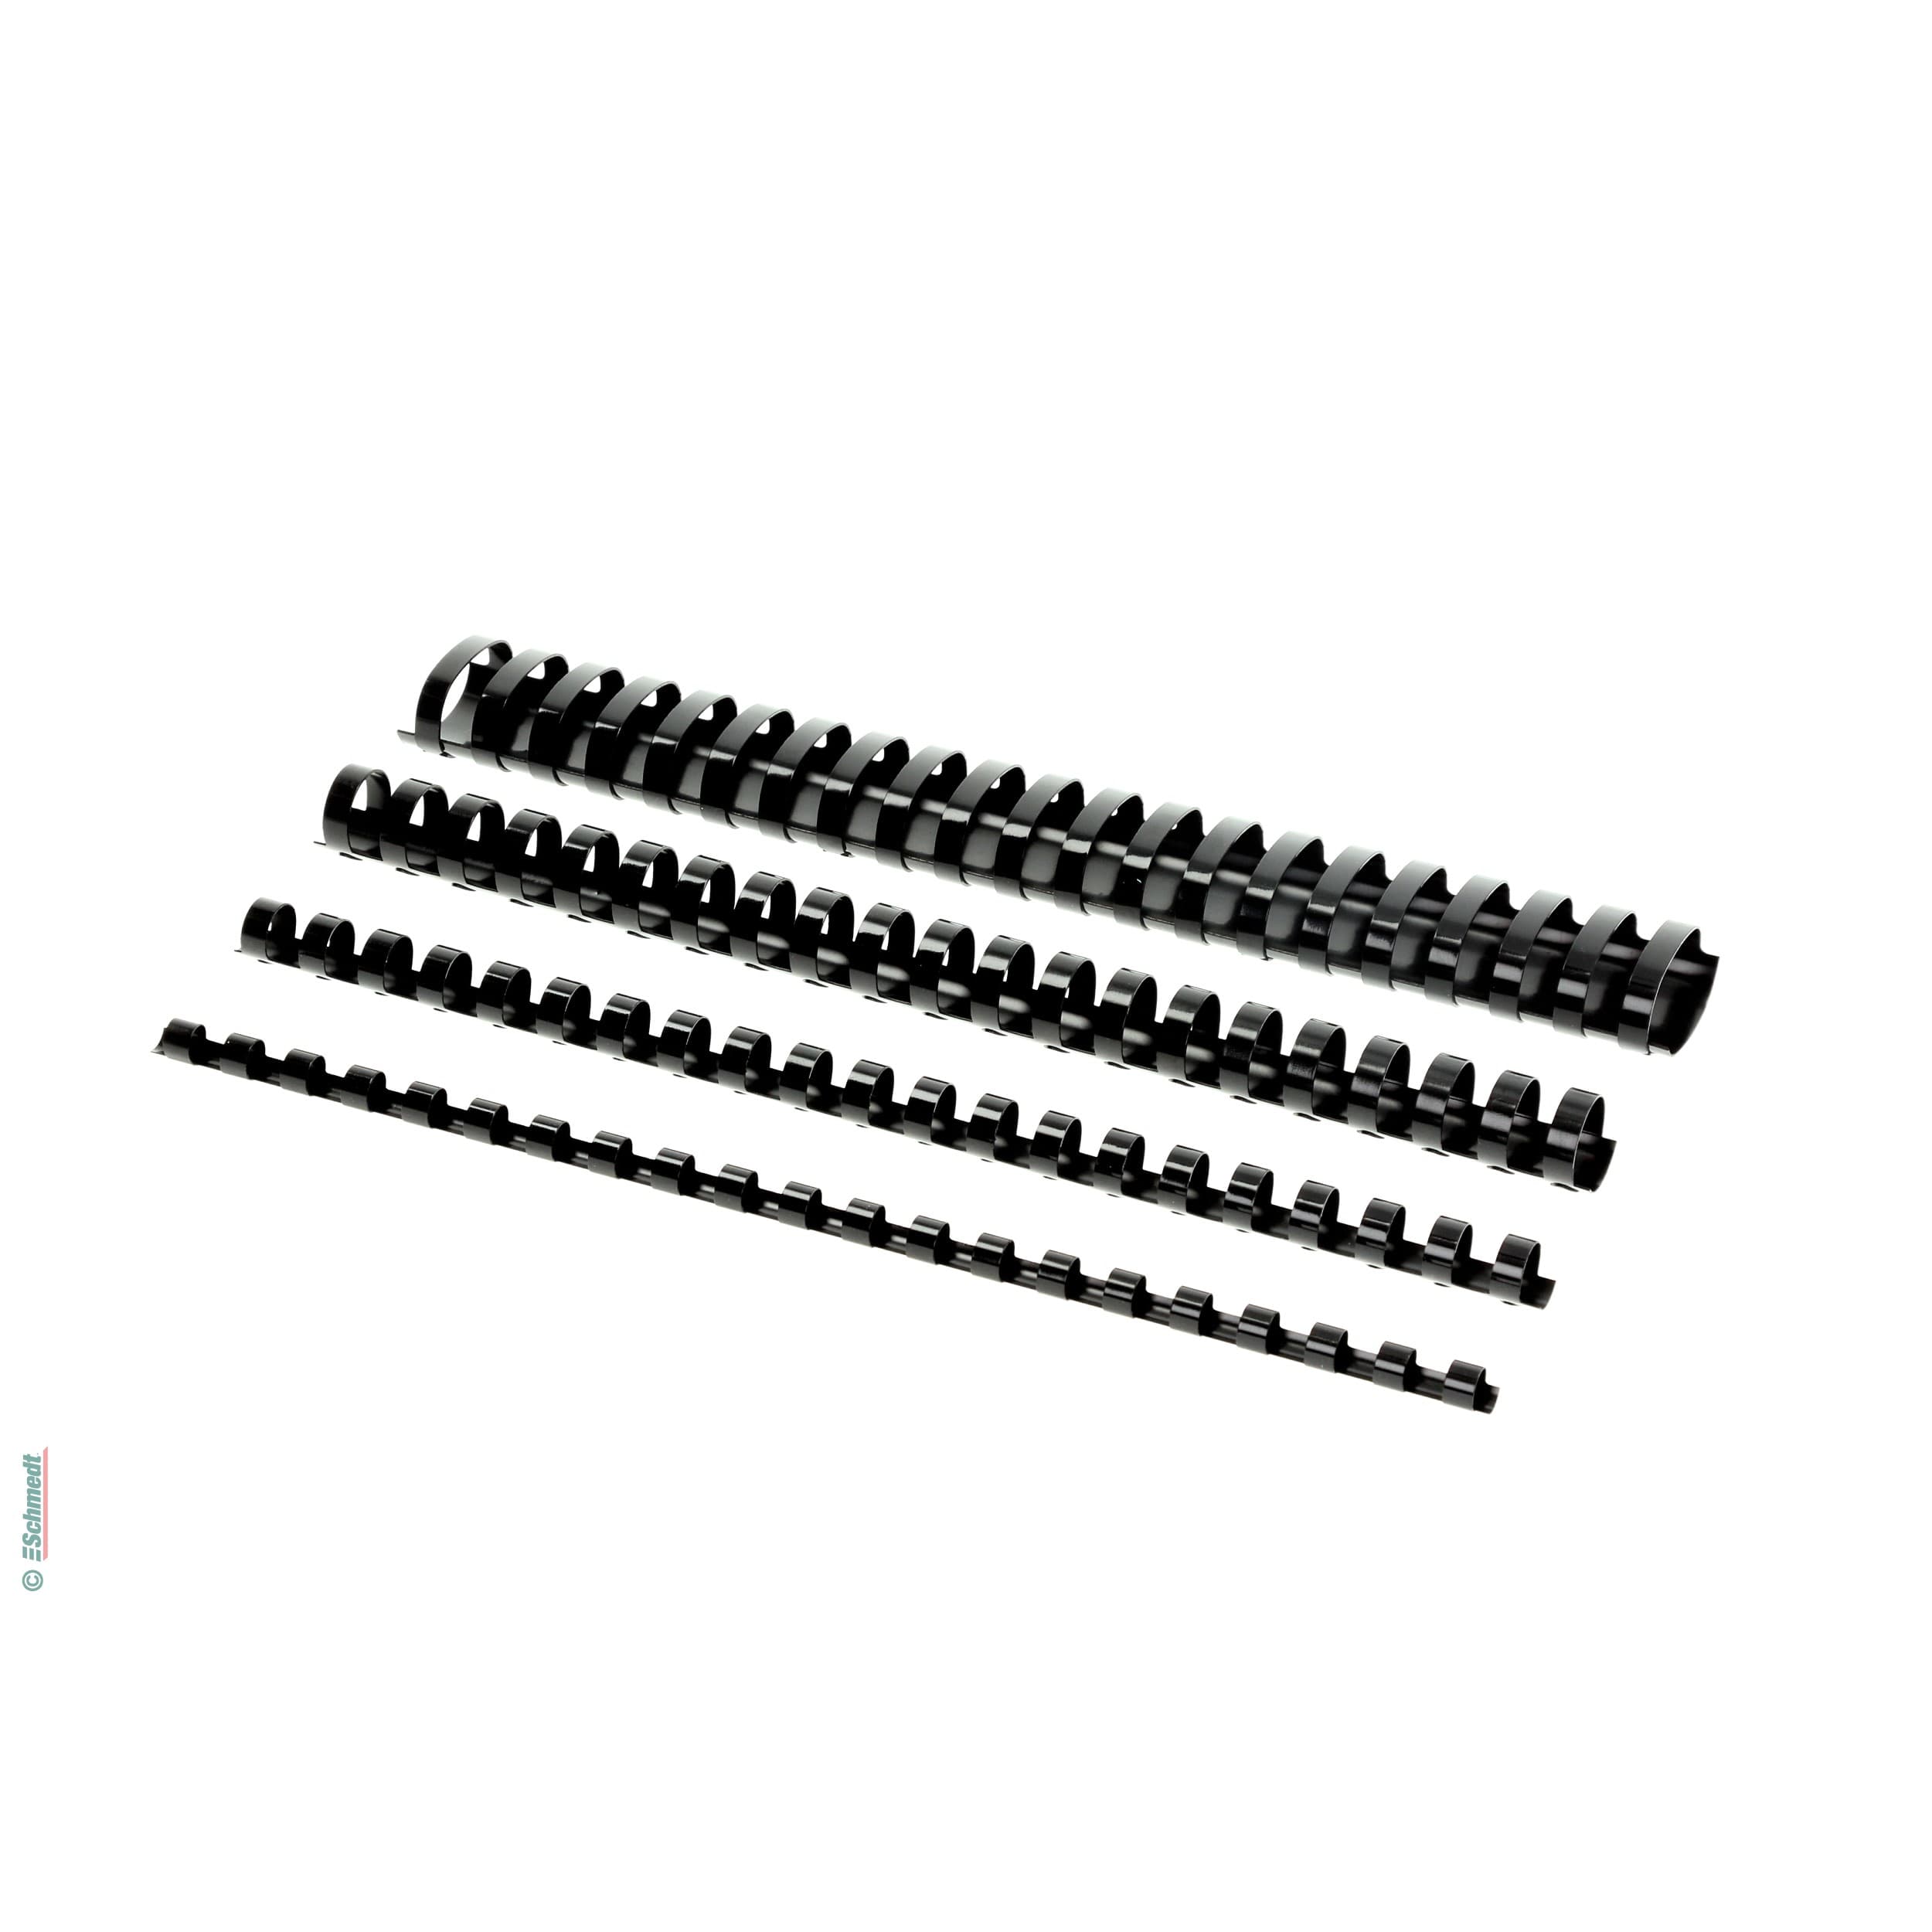 Plastic binding combs - round - Diameter (in mm) 25 - Colour black - to be processed in plastic-comb binding machines... - image-1